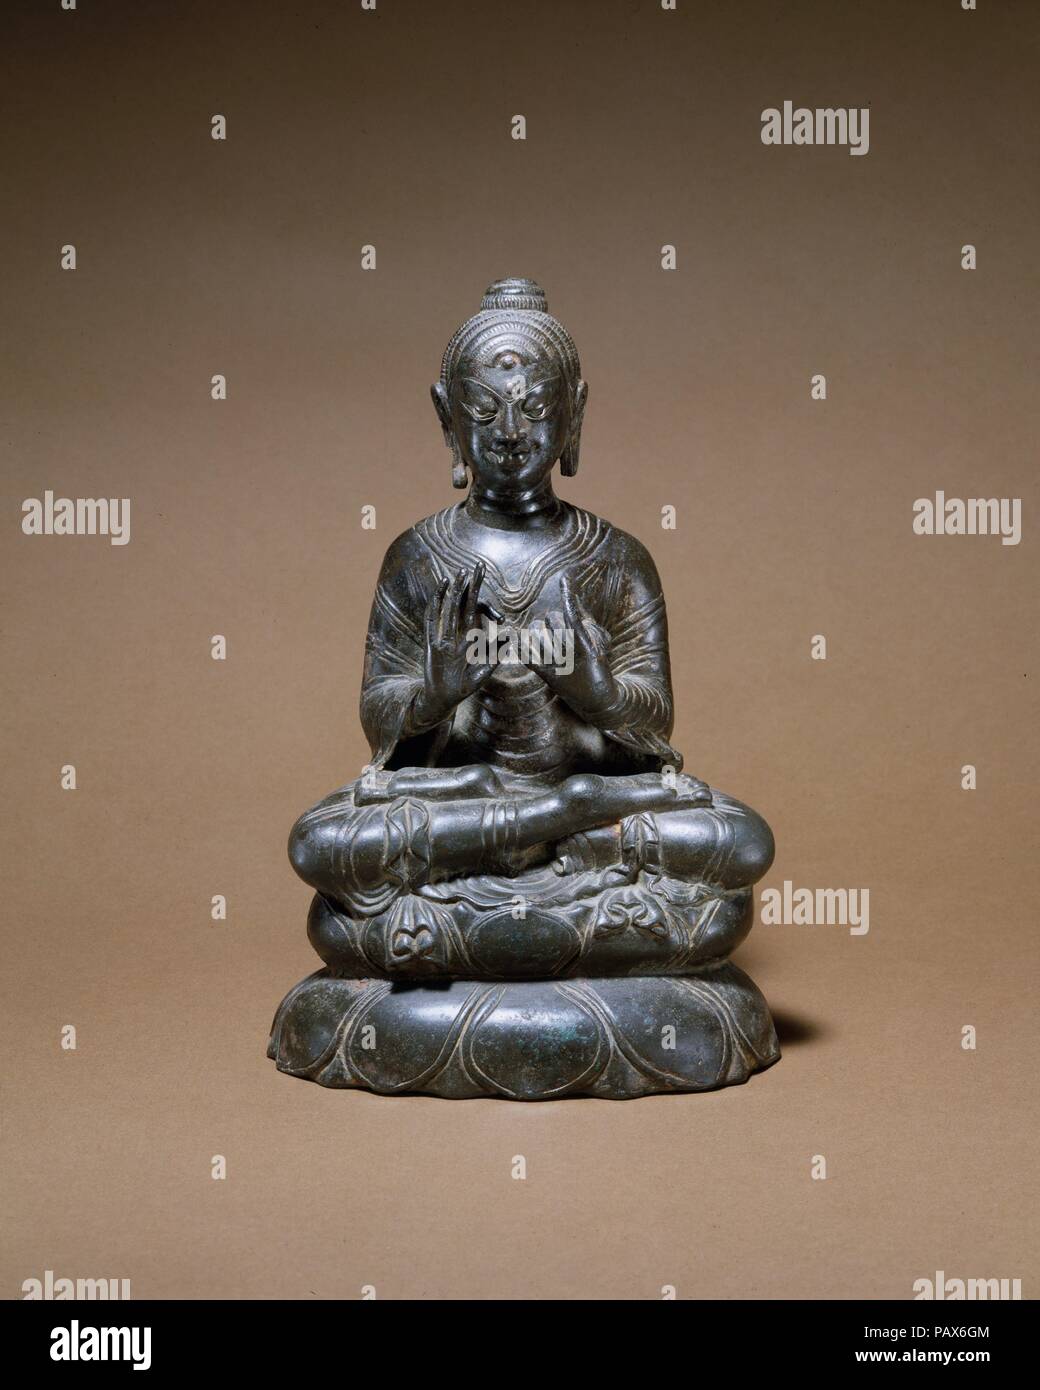 Preaching Buddha. Culture: India (Jammu & Kashmir, ancient kingdom of Kashmir) or Pakistan. Dimensions: H. 8 3/8 in. (21.3 cm). Date: 8th century.  This Buddha, with his legs folded in a full yogic posture and his hands gesturing preaching, invokes the first sermon at Sarnath. The complex treatment of the monastic robes, most notably their pleated ends, is evidence of an unidentified monastic workshop, probably located in Kashmir or the Swat Valley. The treatment of the hair curls is unconventional, as is the extreme stylization of the eyes and eyebrow. Silver inlay marks the eyes and auspicio Stock Photo